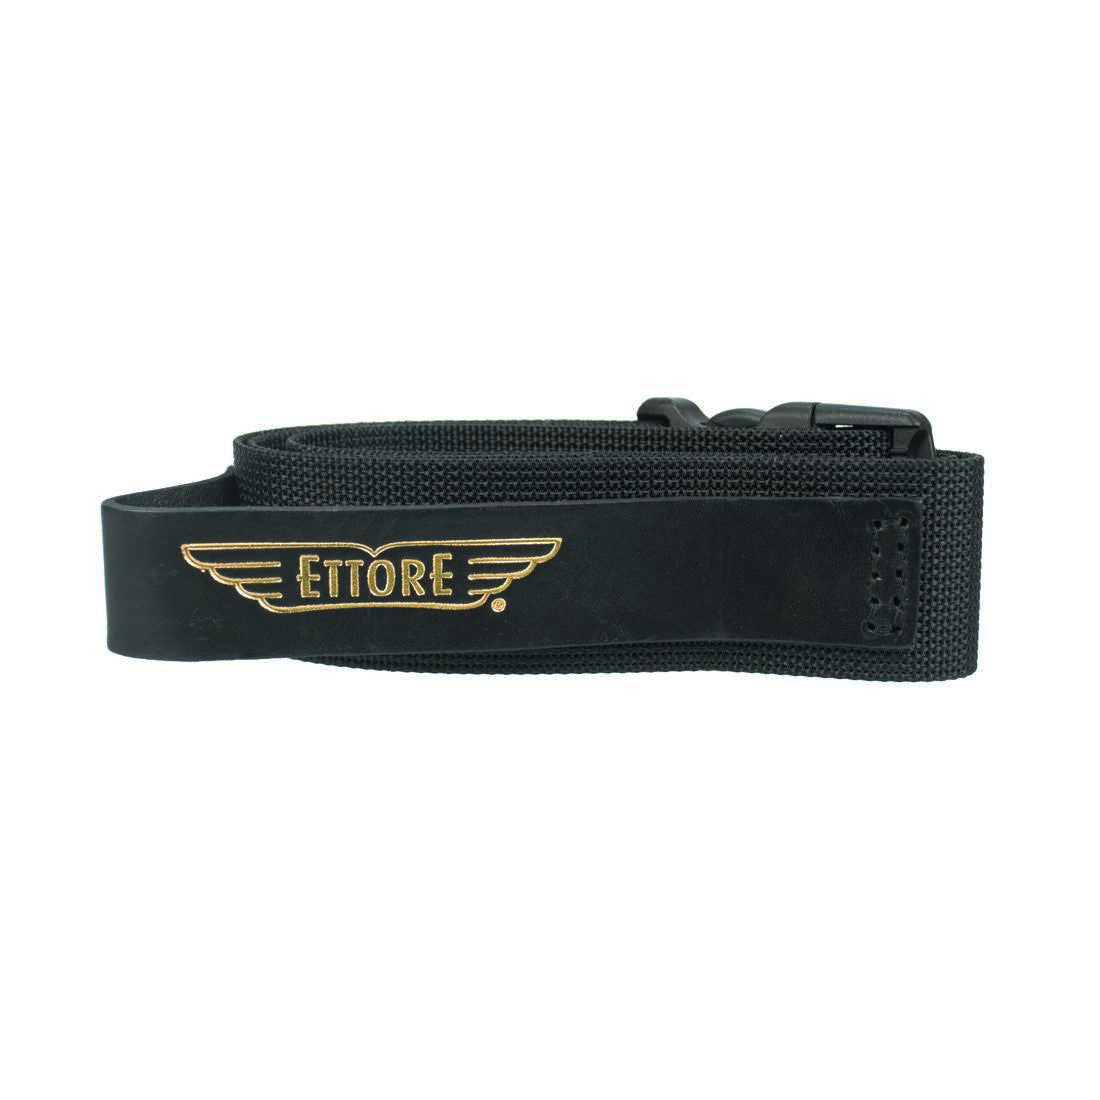 Ettore Tool Belt - Folded - Main Product View